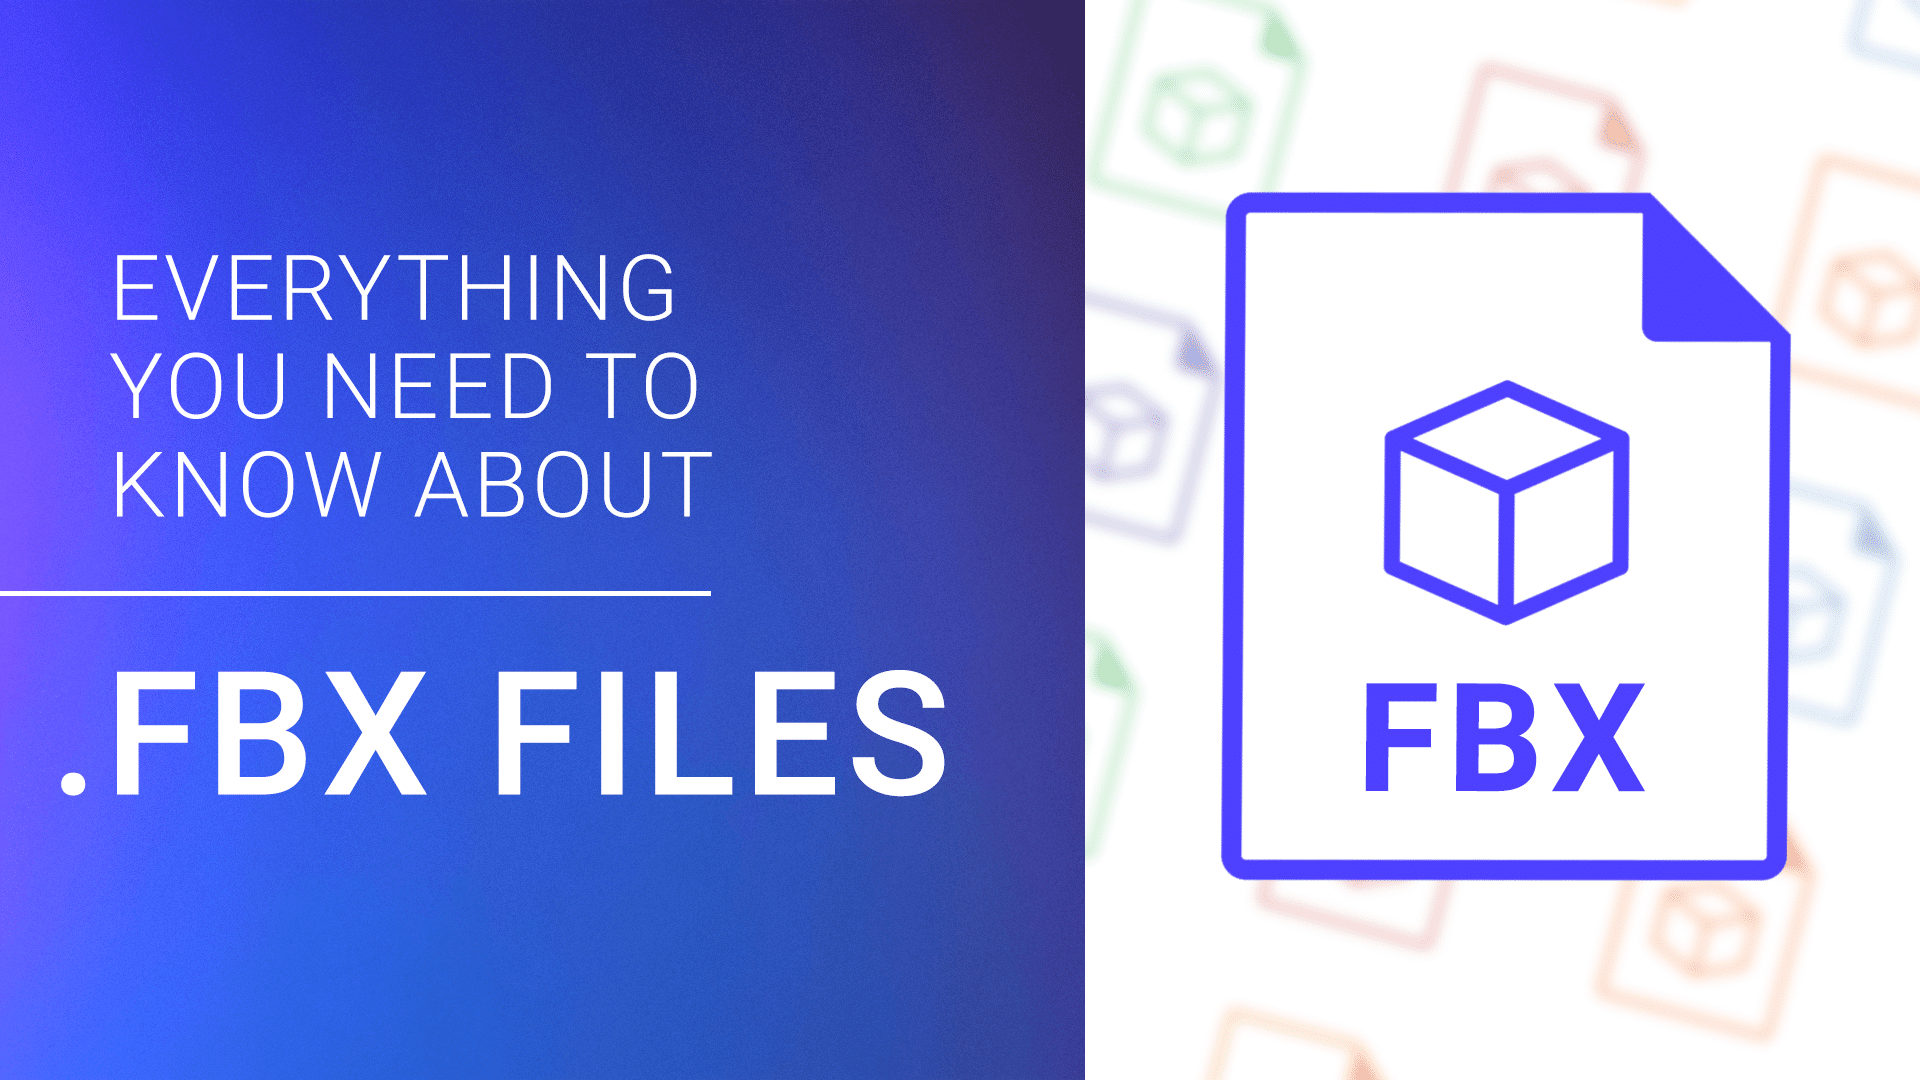 Everything You Need To Know About FBX Files